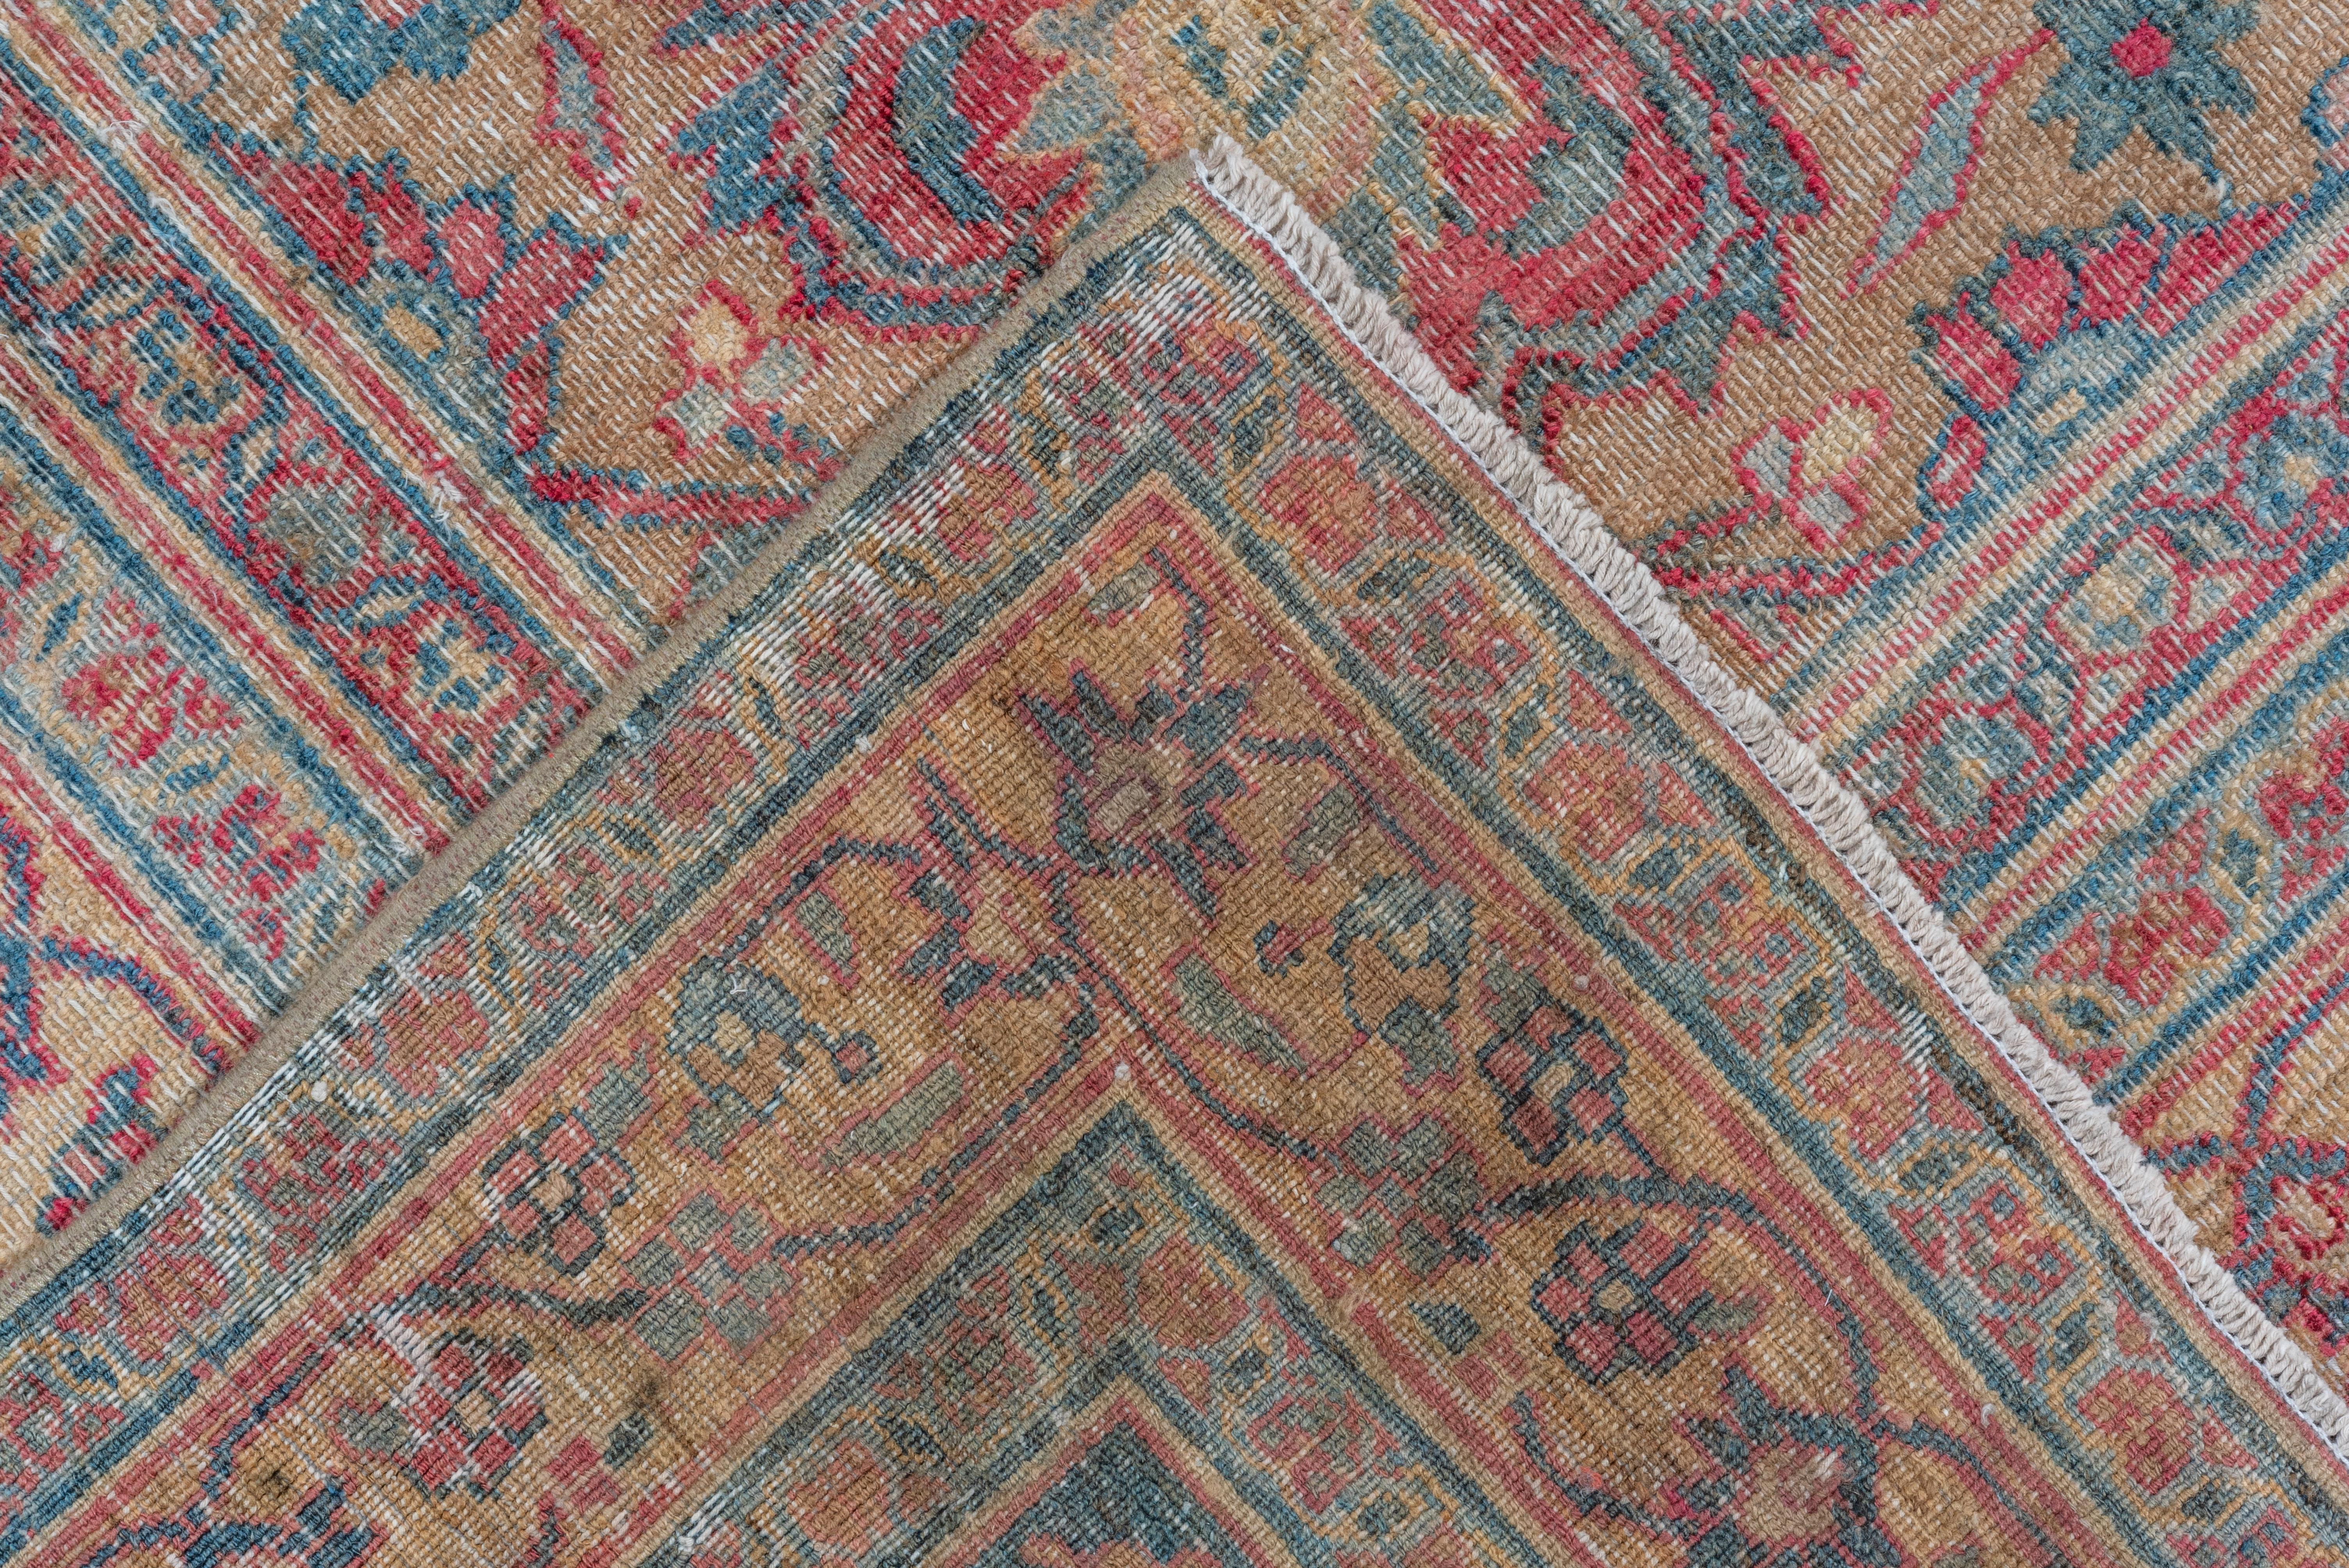 Hand-Knotted Shabby Chic Persian Khorassan Rug with Pink & Teal Tones, Circa 1930s For Sale